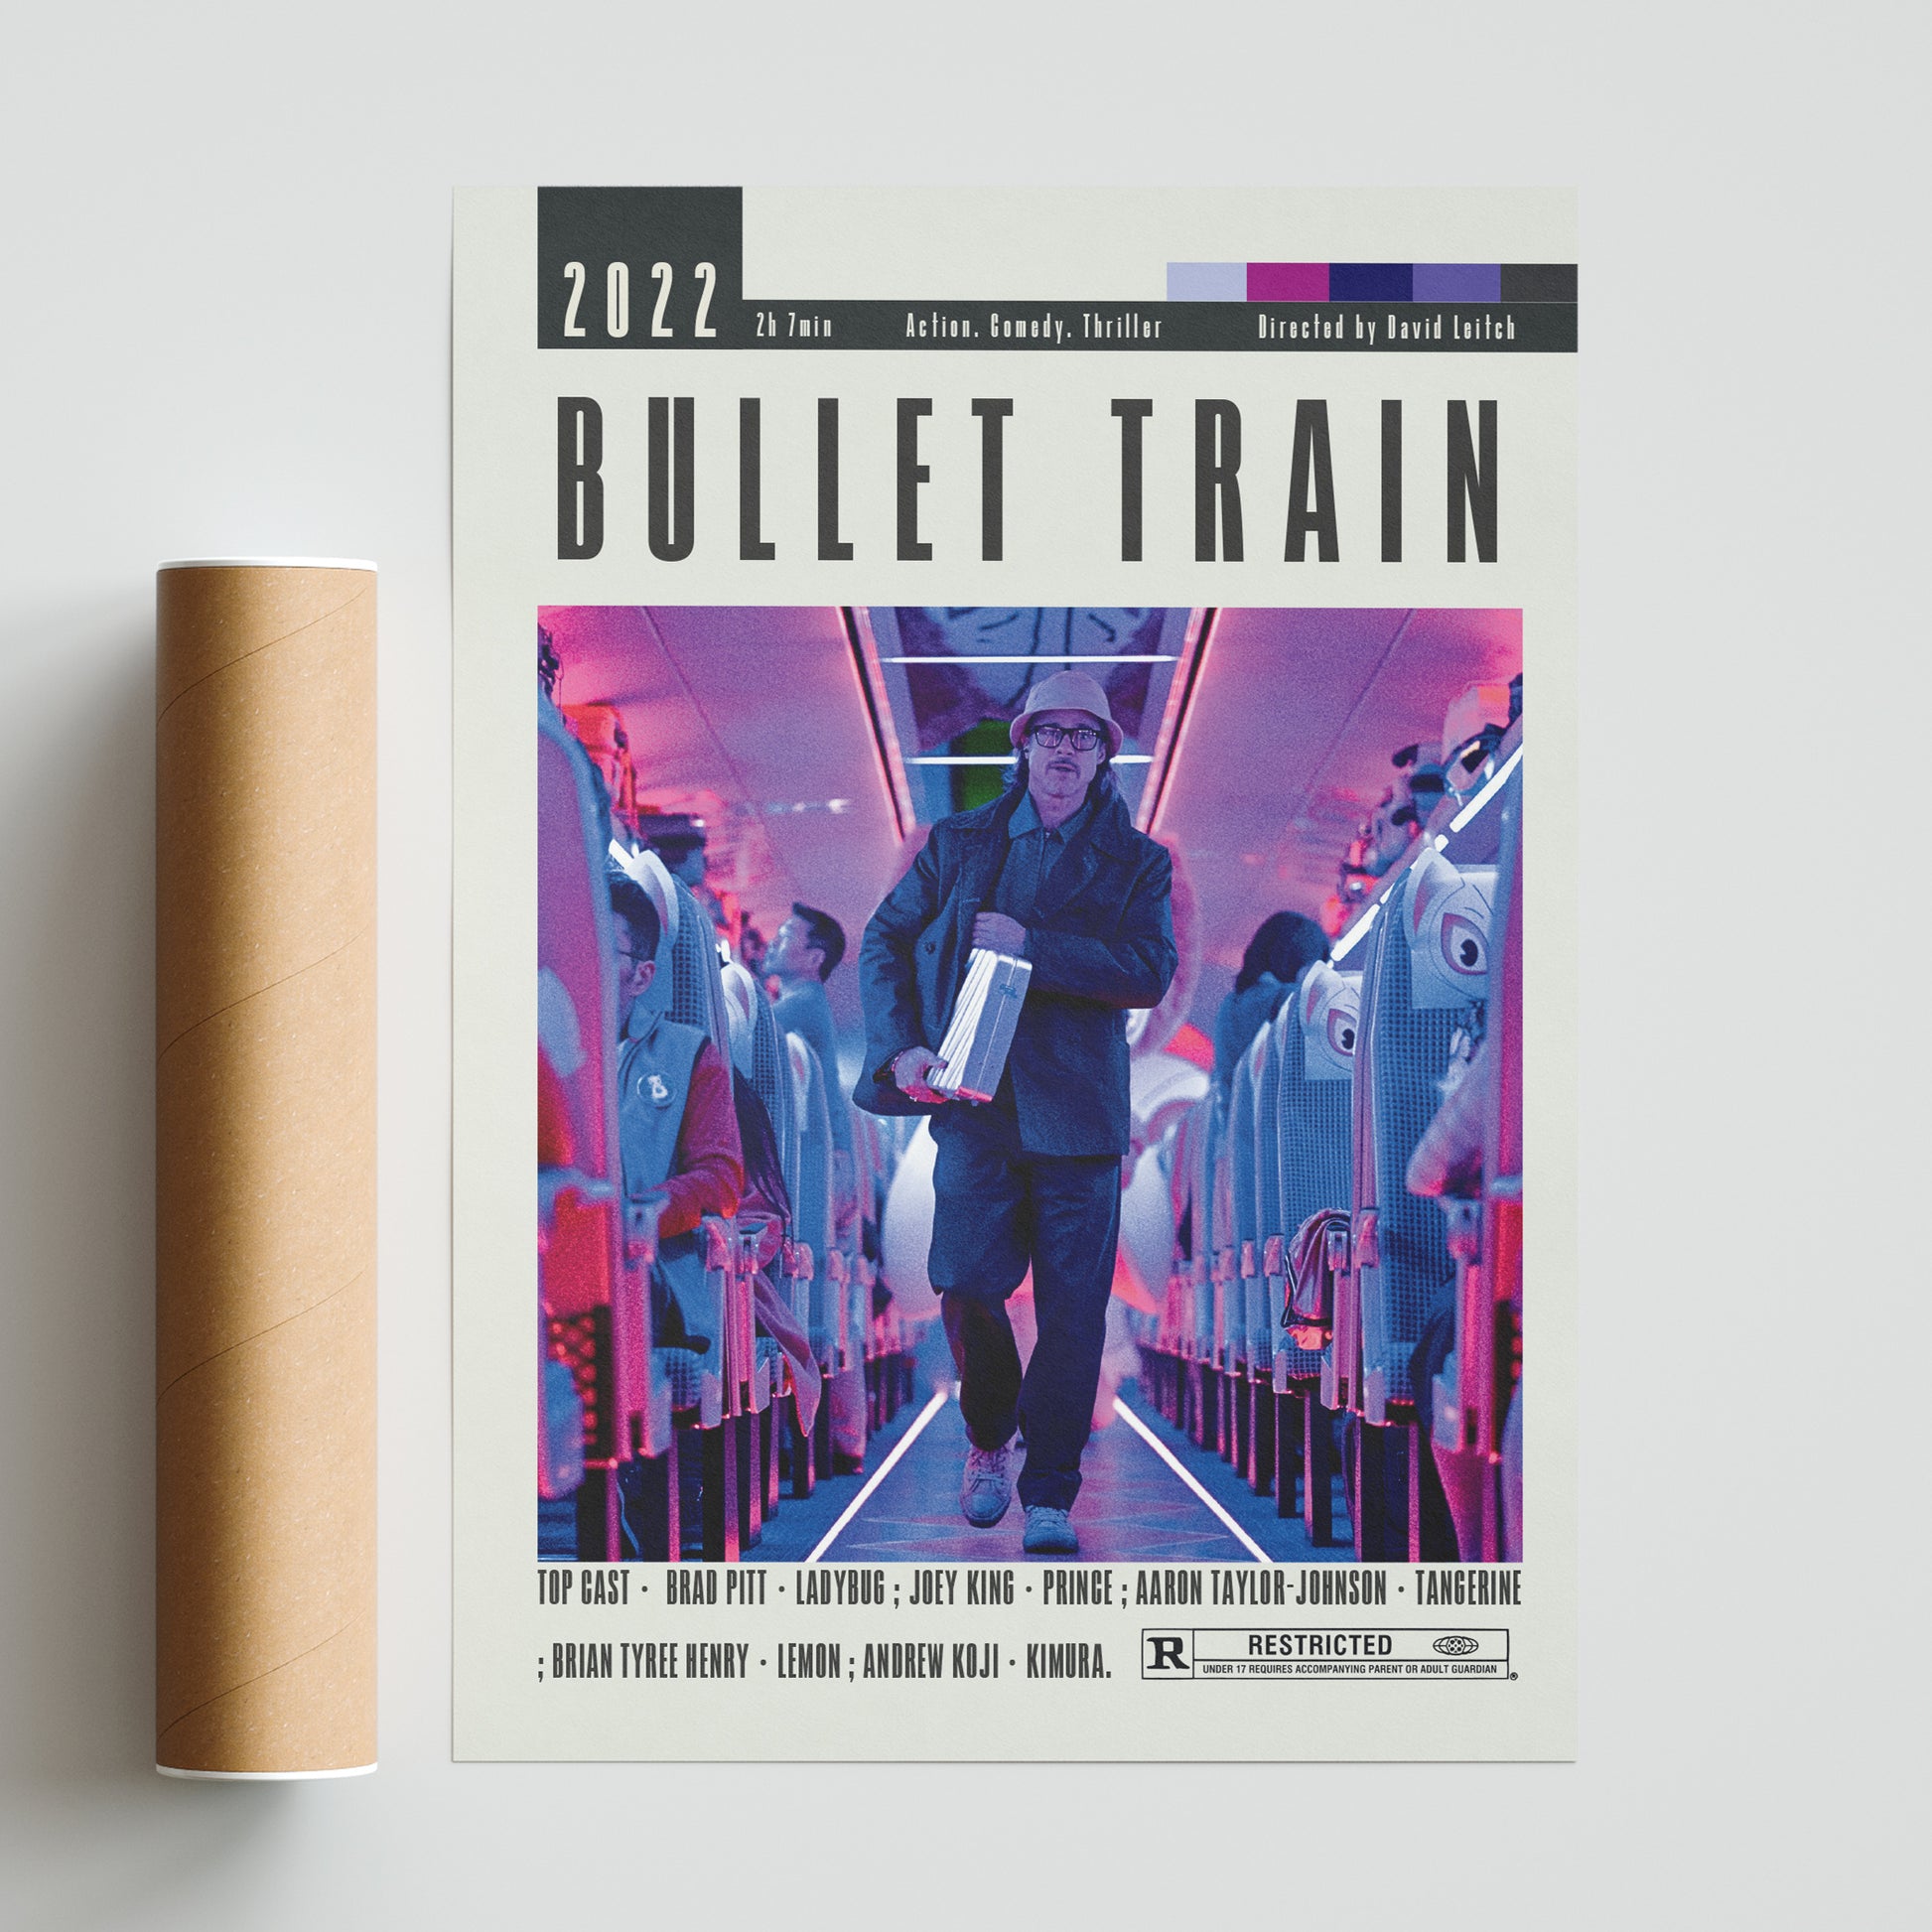 Discover the best movies of all time with our Bullet Train Poster featuring iconic minimalistic designs of 98 types of movie posters. Available in sizes from A6 to A3, this custom wall art print will elevate your decor with vintage retro vibes. Each poster includes top cast, duration, director, and iconic scenes.